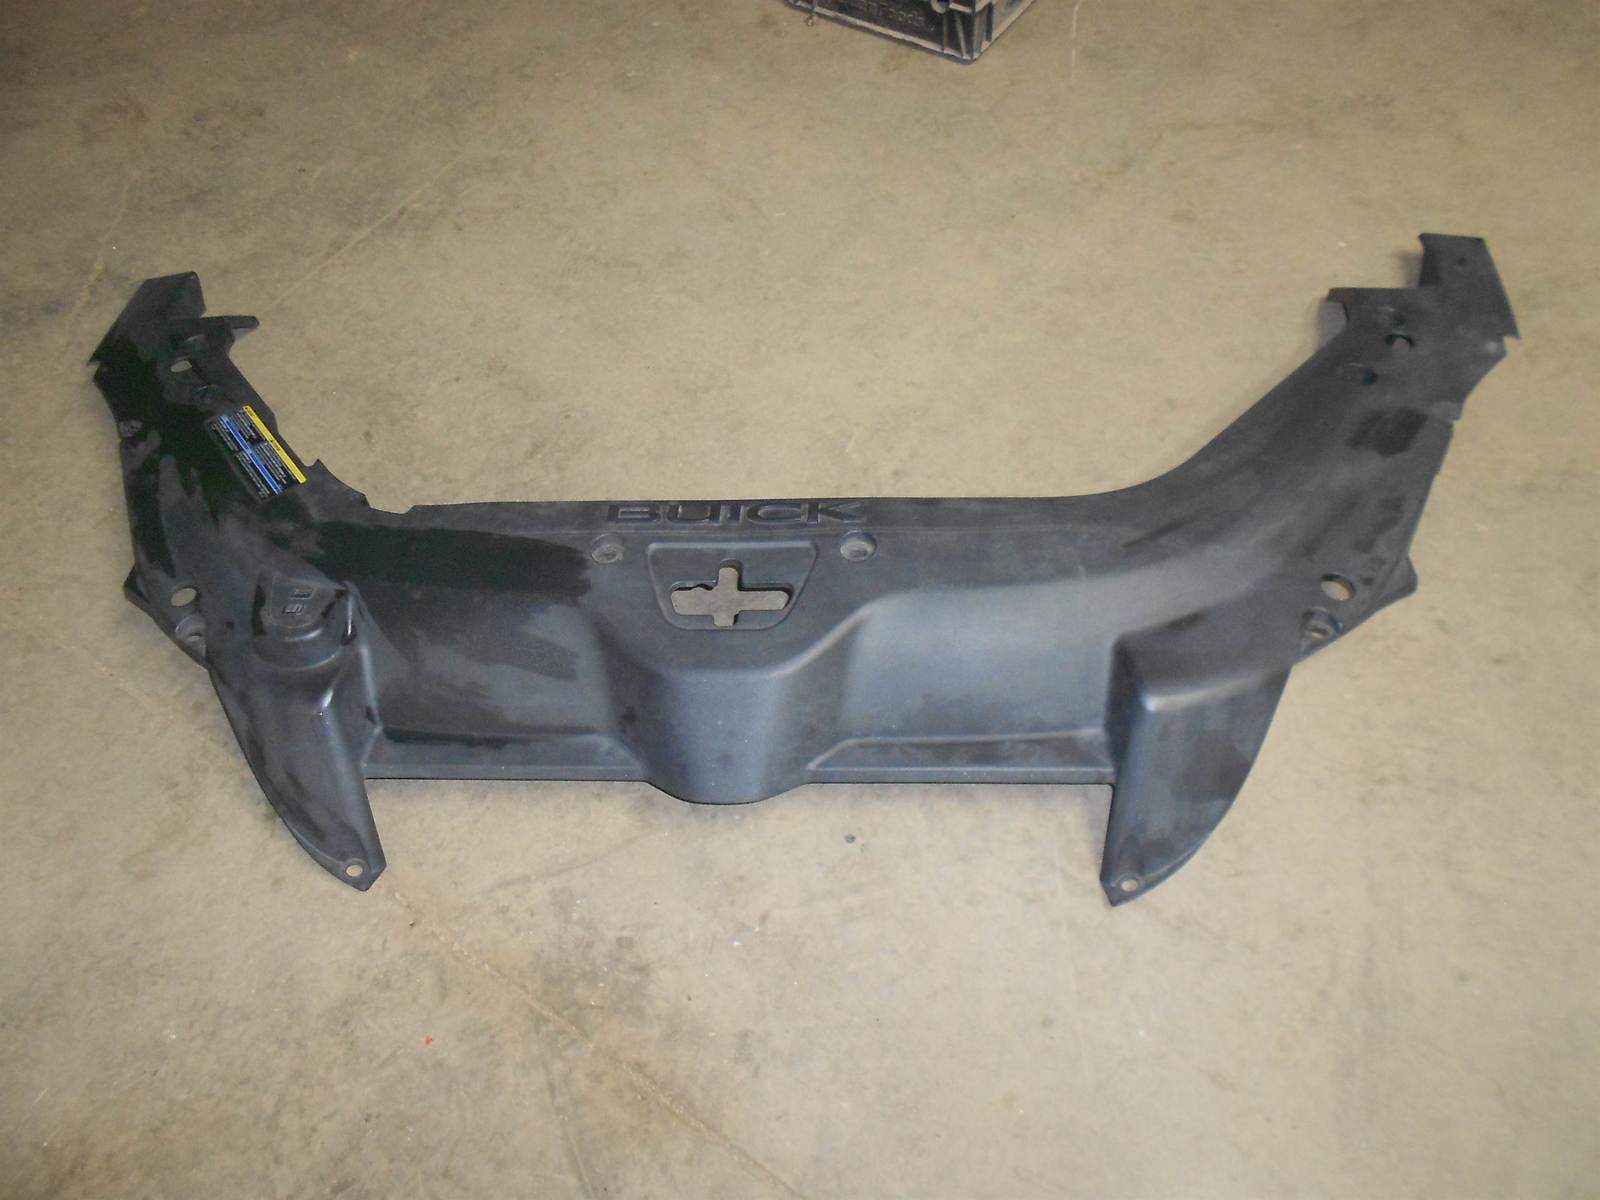 2008-2012 BUICK ENCLAVE Front Radiator Engine Cover Shield OEM 25831404 - $174.99